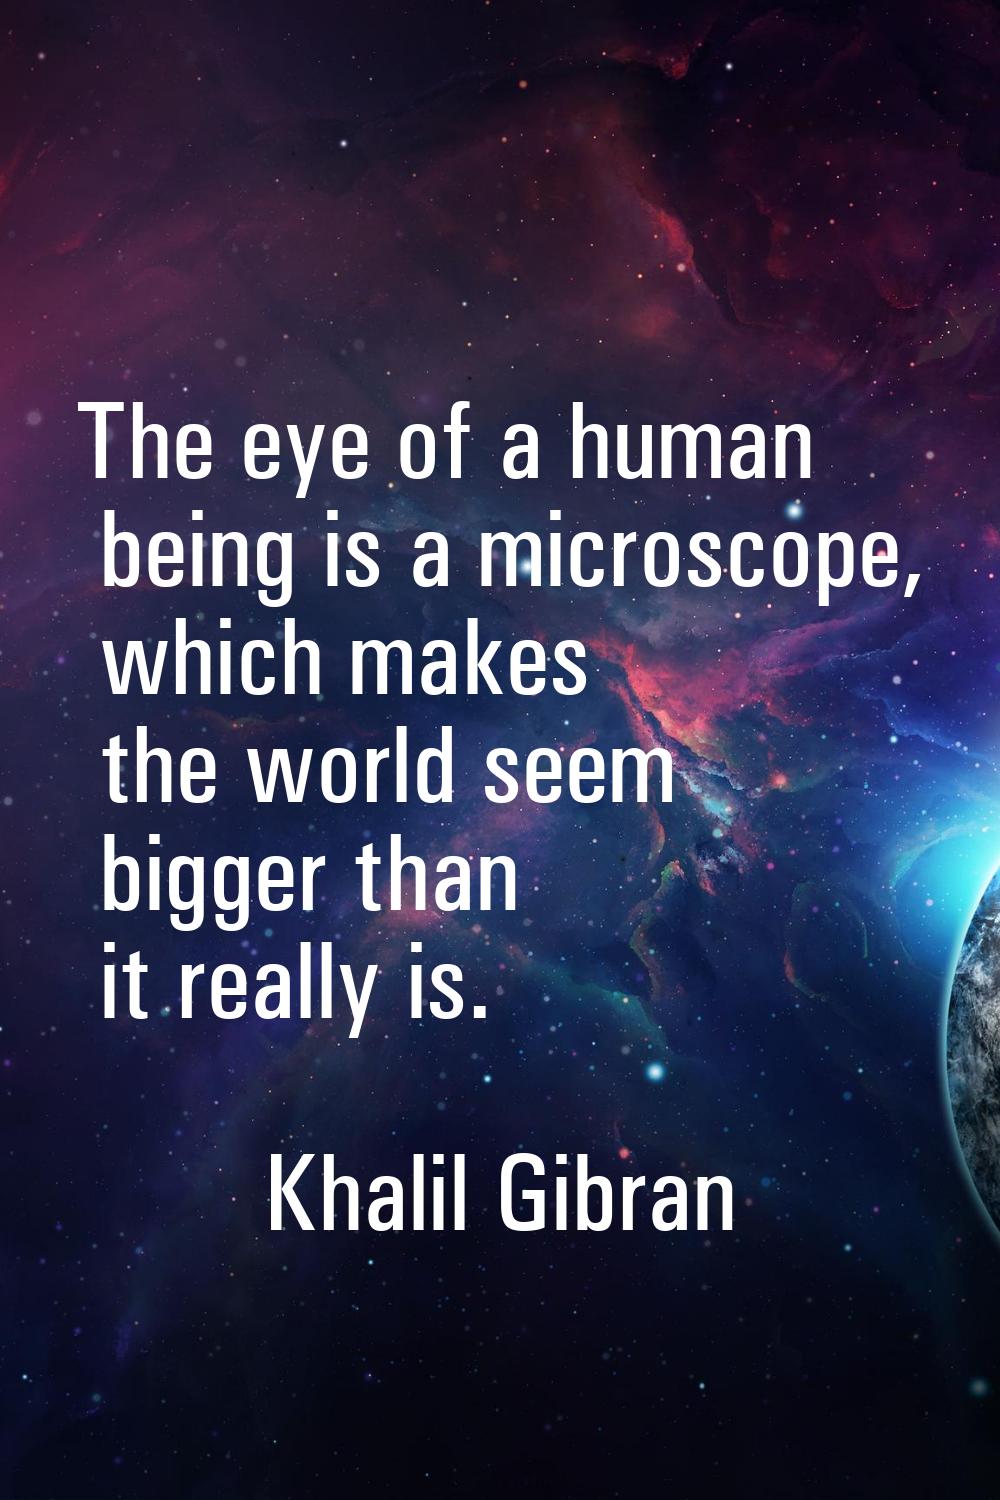 The eye of a human being is a microscope, which makes the world seem bigger than it really is.